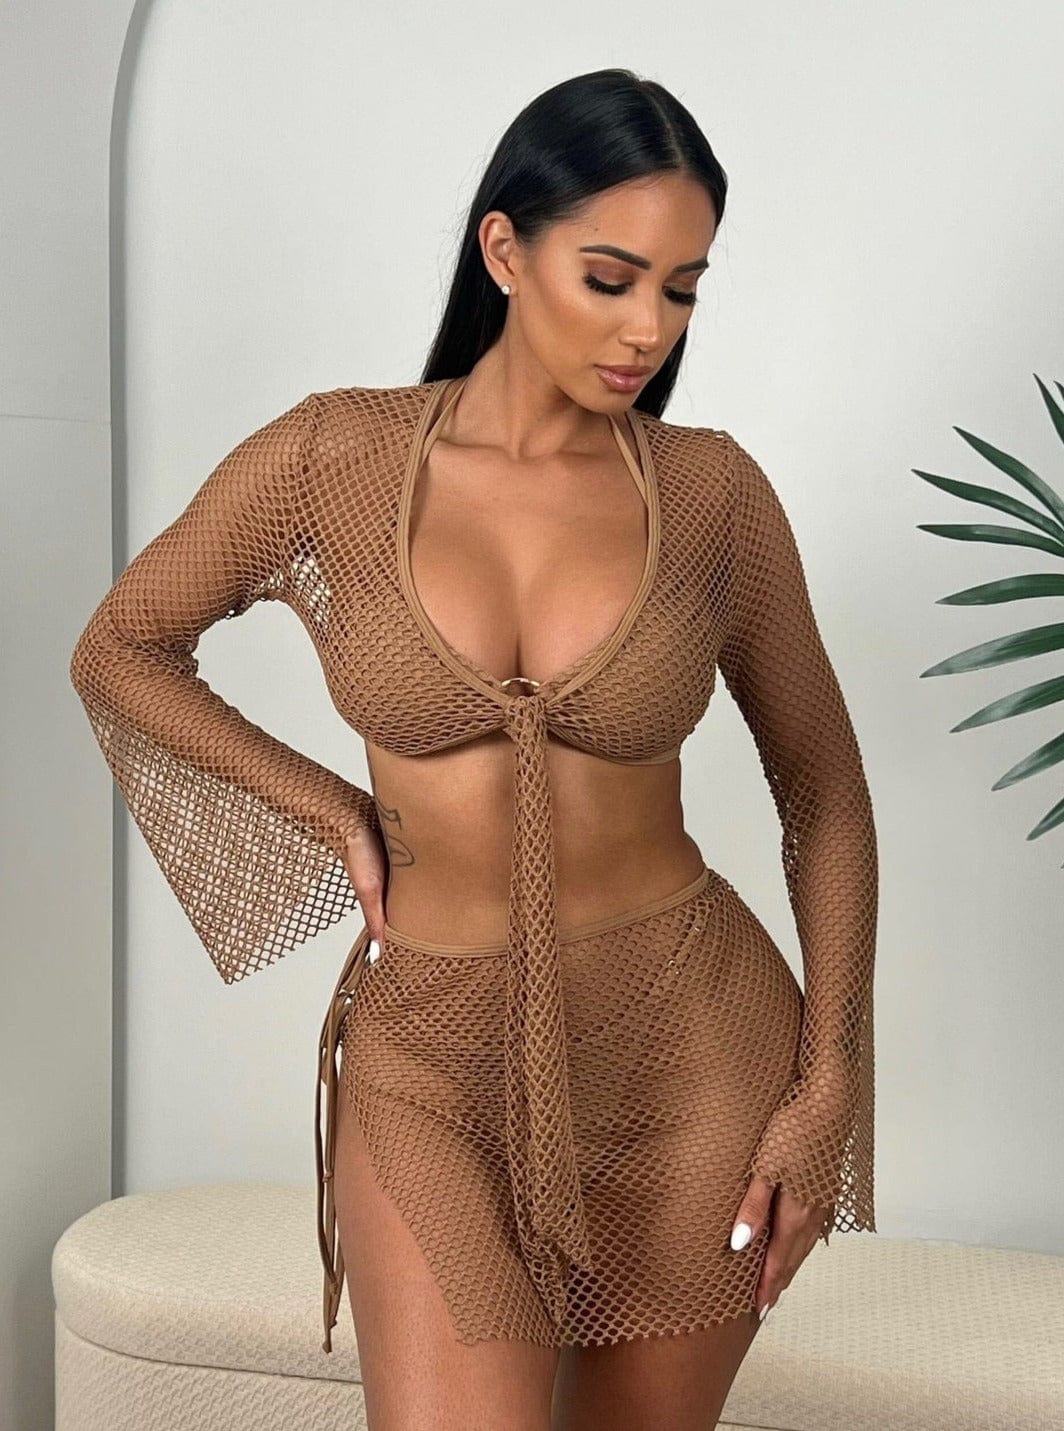 Berry Beachy Swimwear Apparel & Accessories > Clothing > Skirts 2 Pc. Gray Tulum Mesh Net Tie Front Top & Skirt Beach Cover-Up Set 2023 Sexy Gray Berry Beachy Swimwear Sexy Tulum Net Skirt Top Set